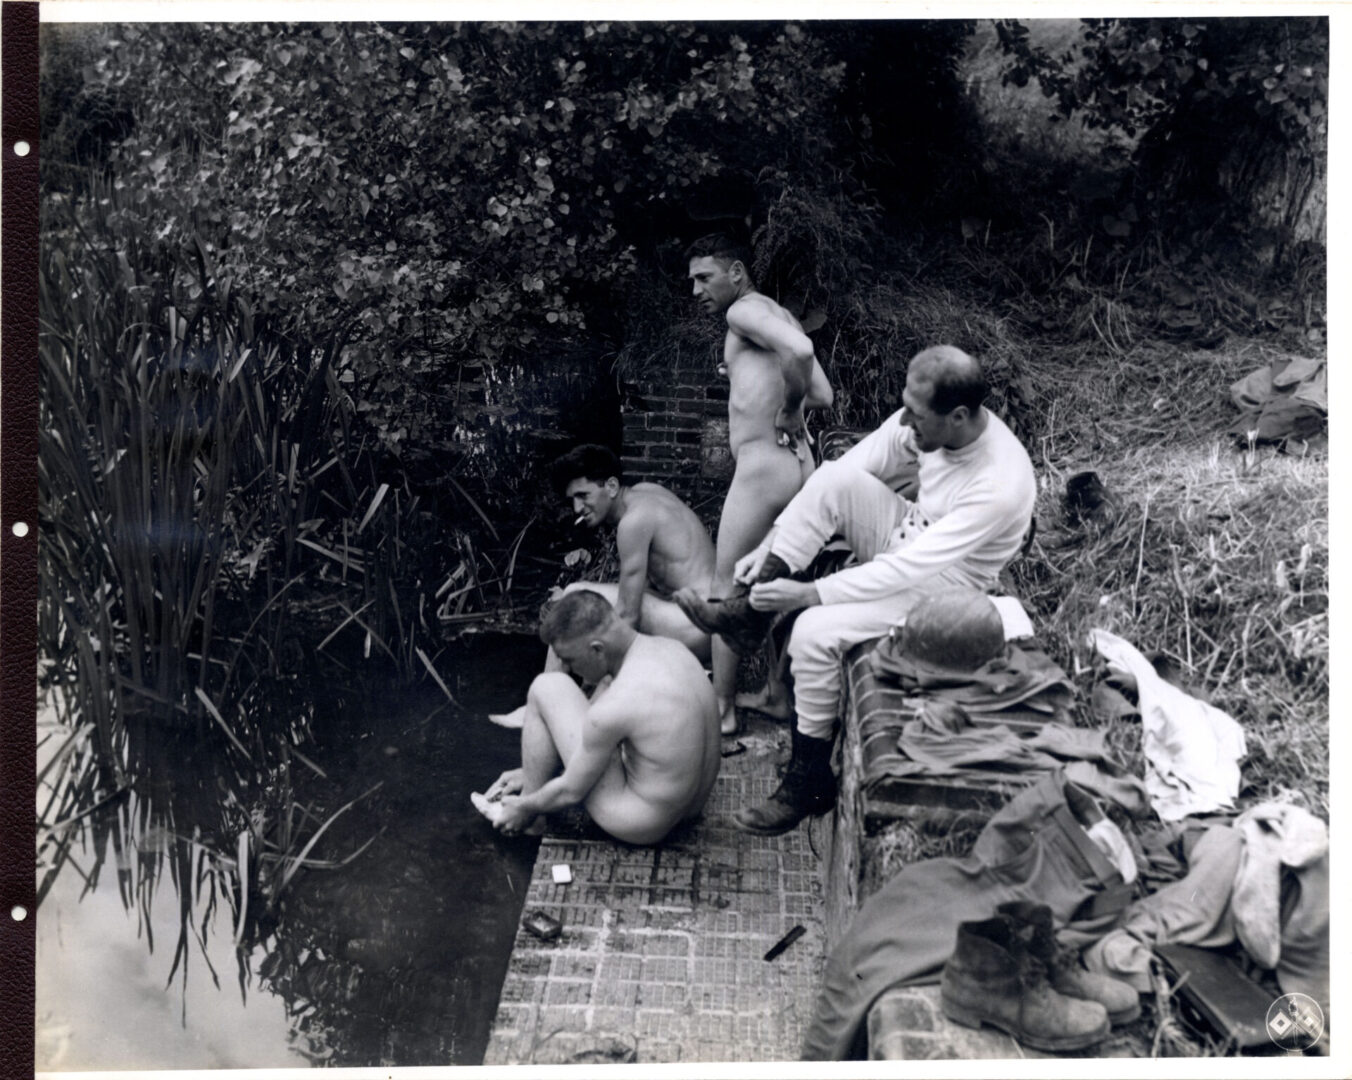 Soldiers use a rural stream to relax and clean themselves